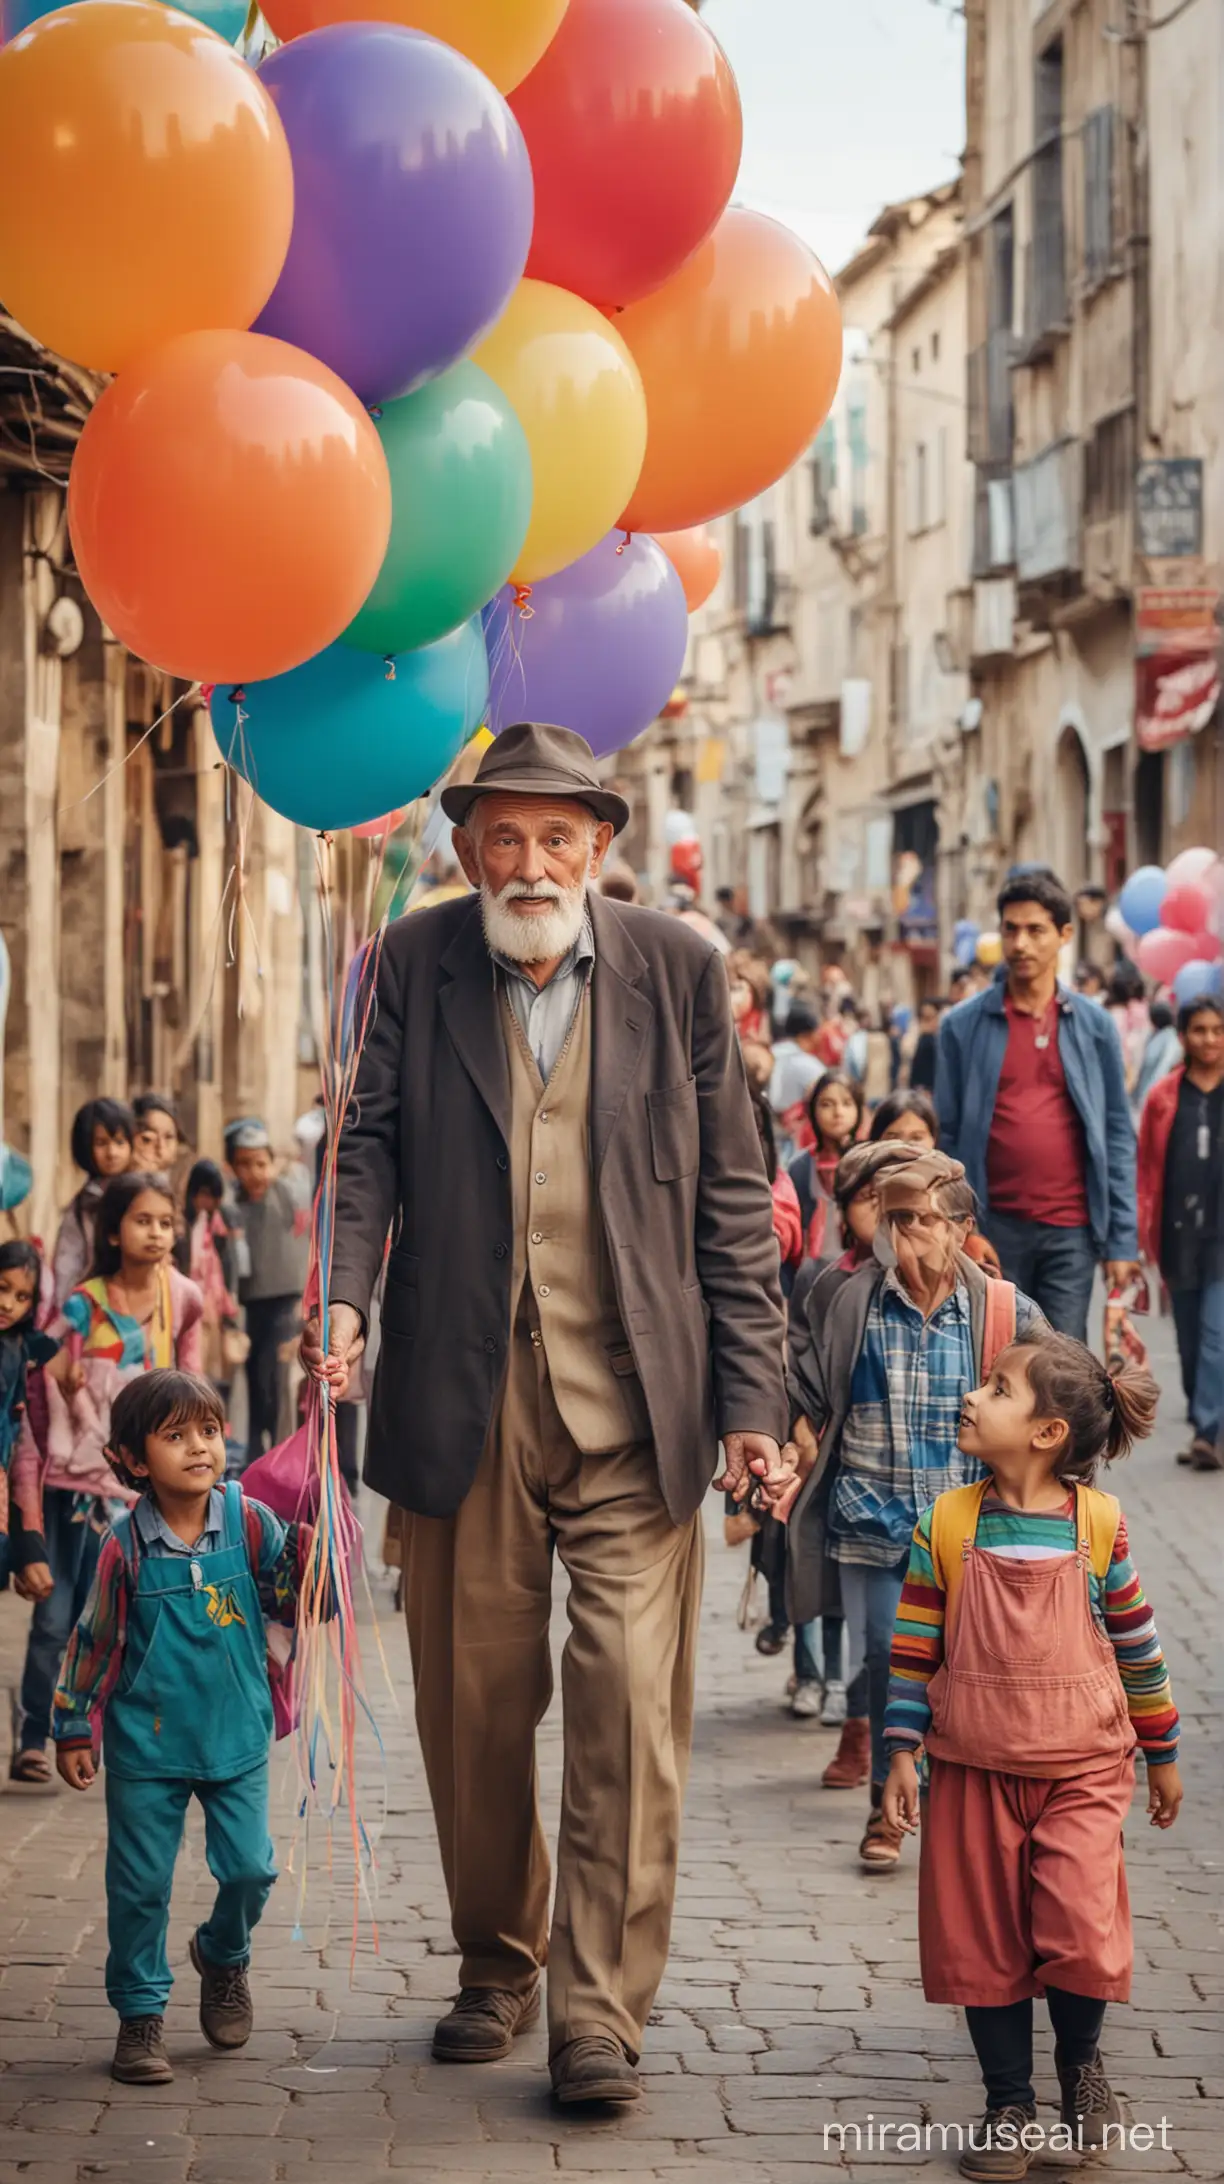 An old man selling colorful baloons and children around him purchasing